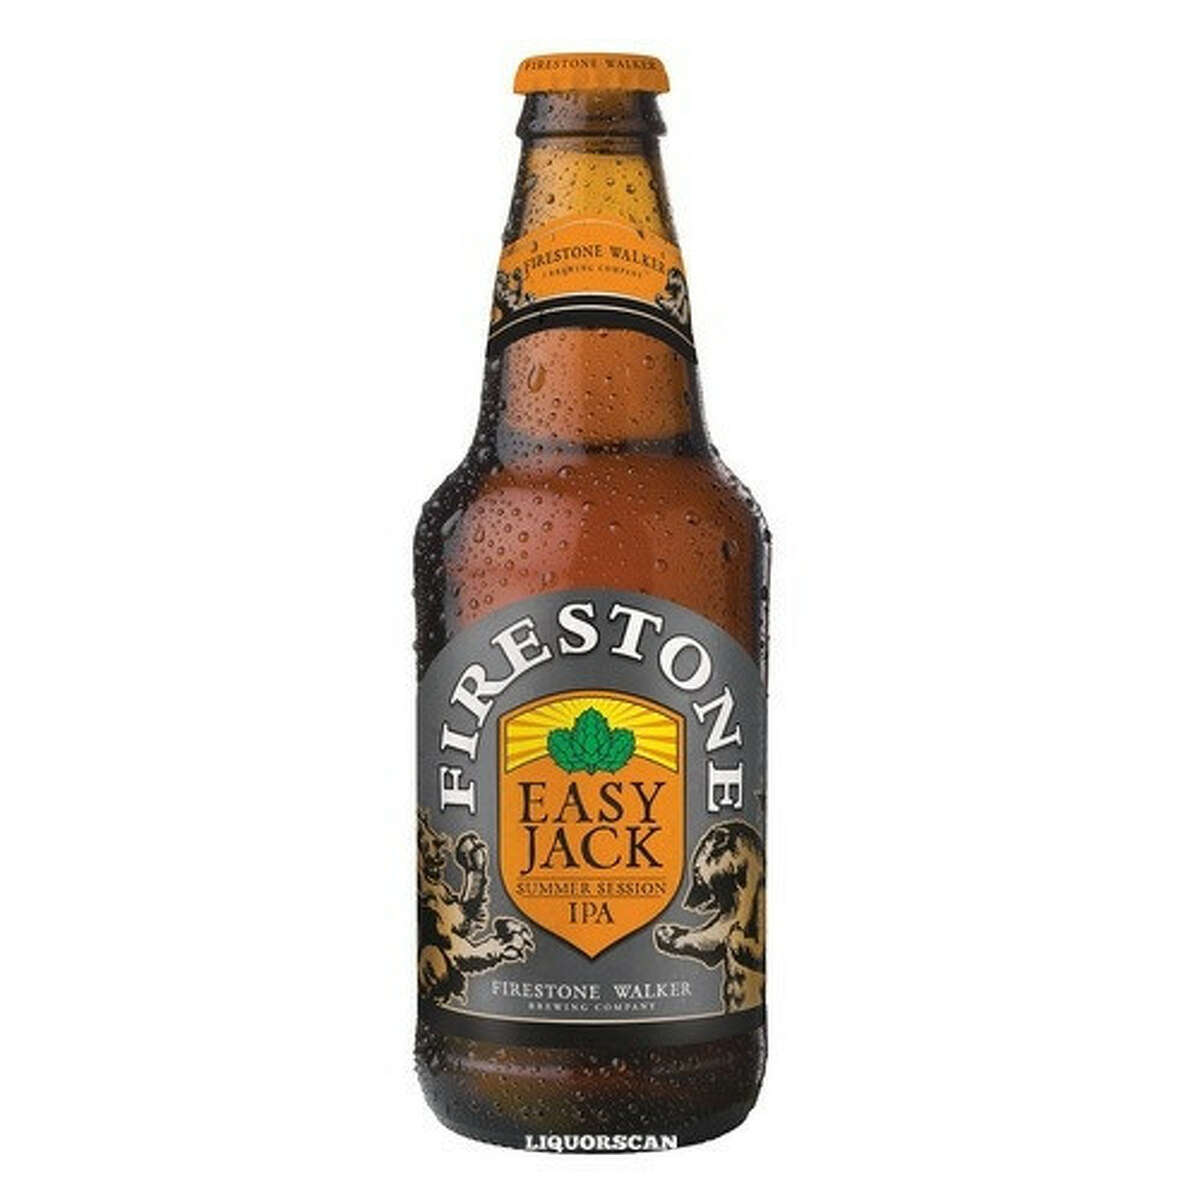 Firestone Walker’s Easy Jack. Style: Session IPA. ABV: 4.5%. IPAs are normally too heavy and boozy to be much of a session beer, which is why we’ve seen a sudden rise in session IPAs — they’ve got less alcohol, less weightiness and are meant to be enjoyed one after the other. Eazy Jack is a take on Firestone Walker’s classic IPA Union Jack — it delivers that glorious bitter hoppiness without overwhelming your buzz.